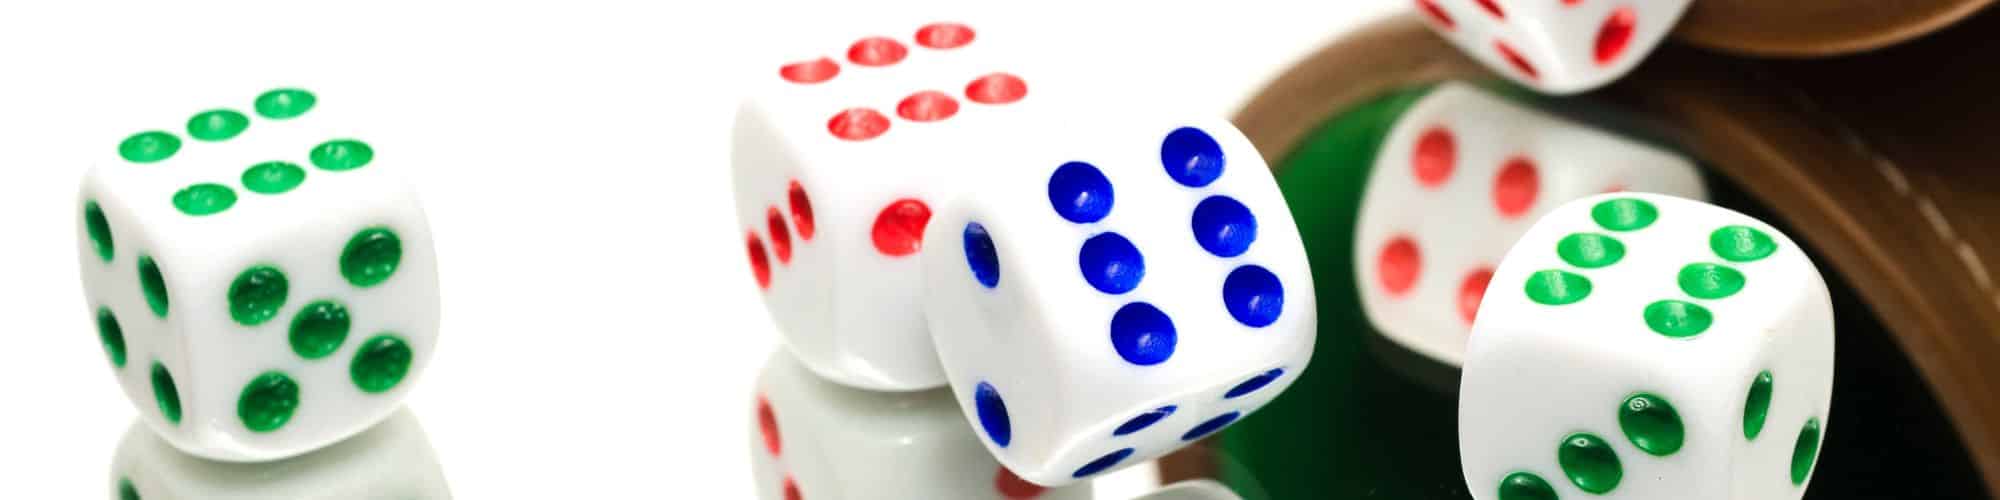 Family games with dice for teens